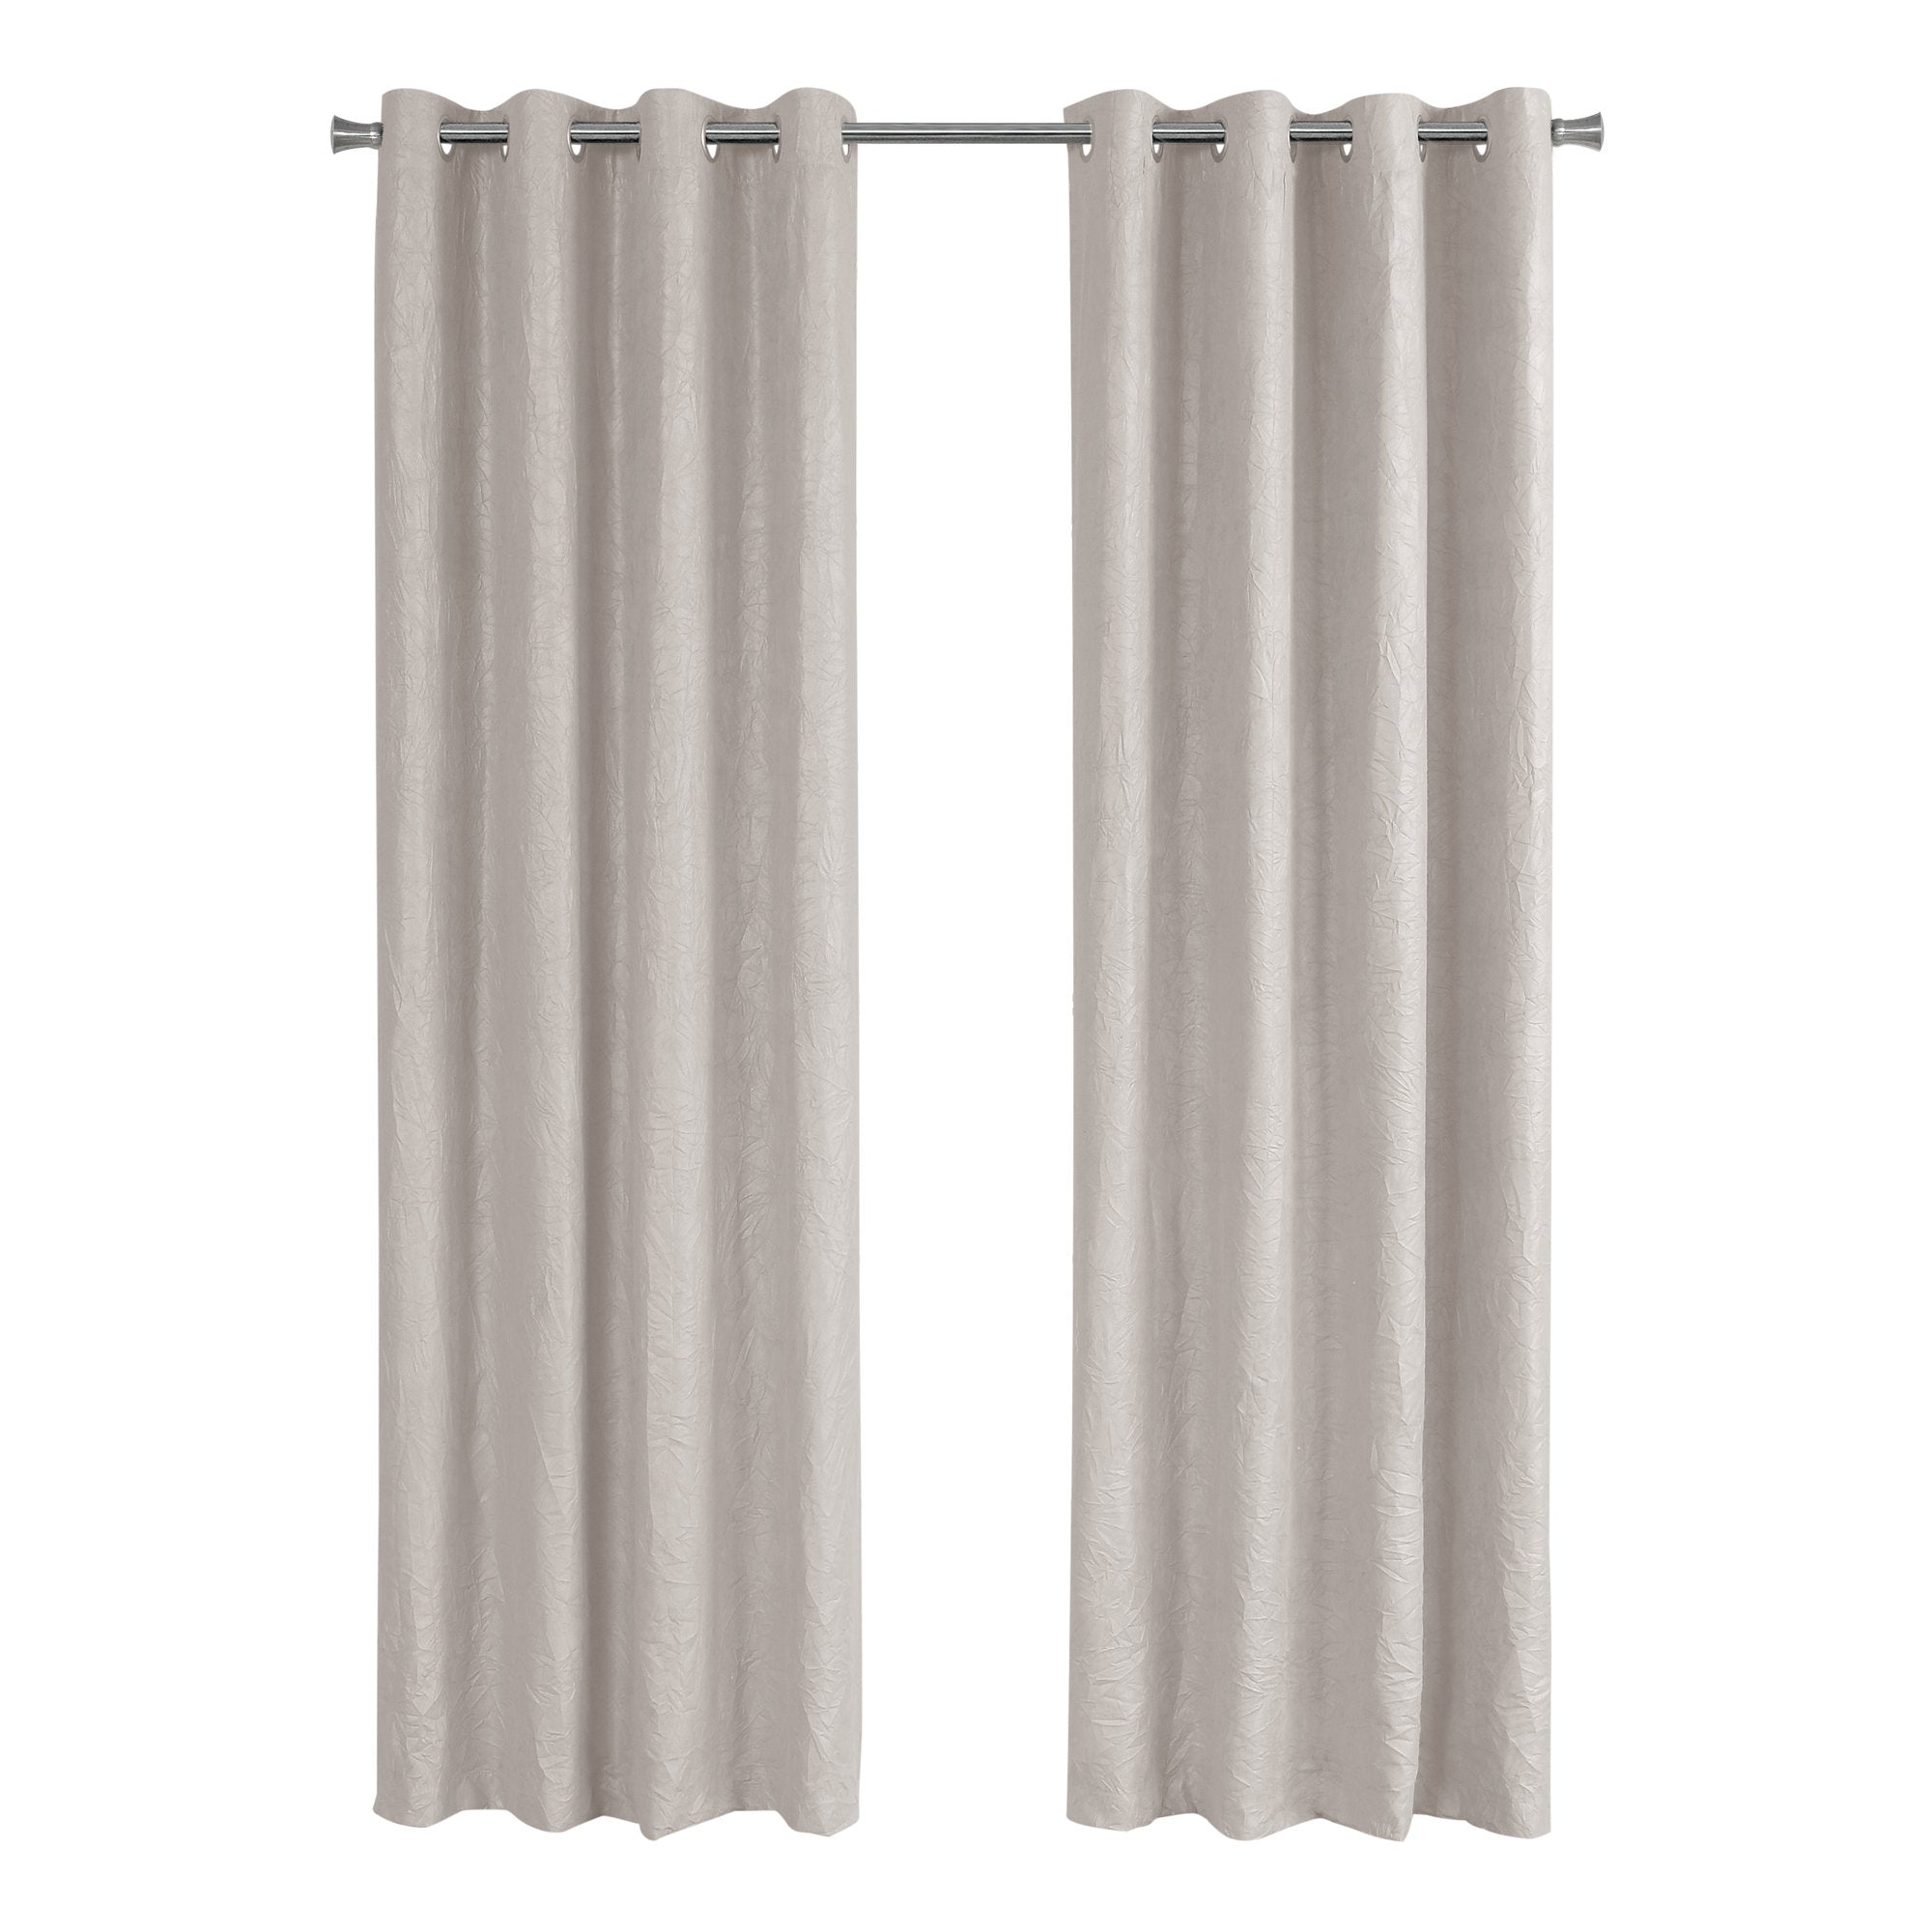 MN-899817    Curtain Panel, 2Pcs Set, 54"W X 84"L, Room Darkening, Grommet, Living Room, Bedroom, Kitchen, Micro Suede, Wrinkled  Finish, Polyester Room Darkening Fabric, Ivory, Contemporary, Modern